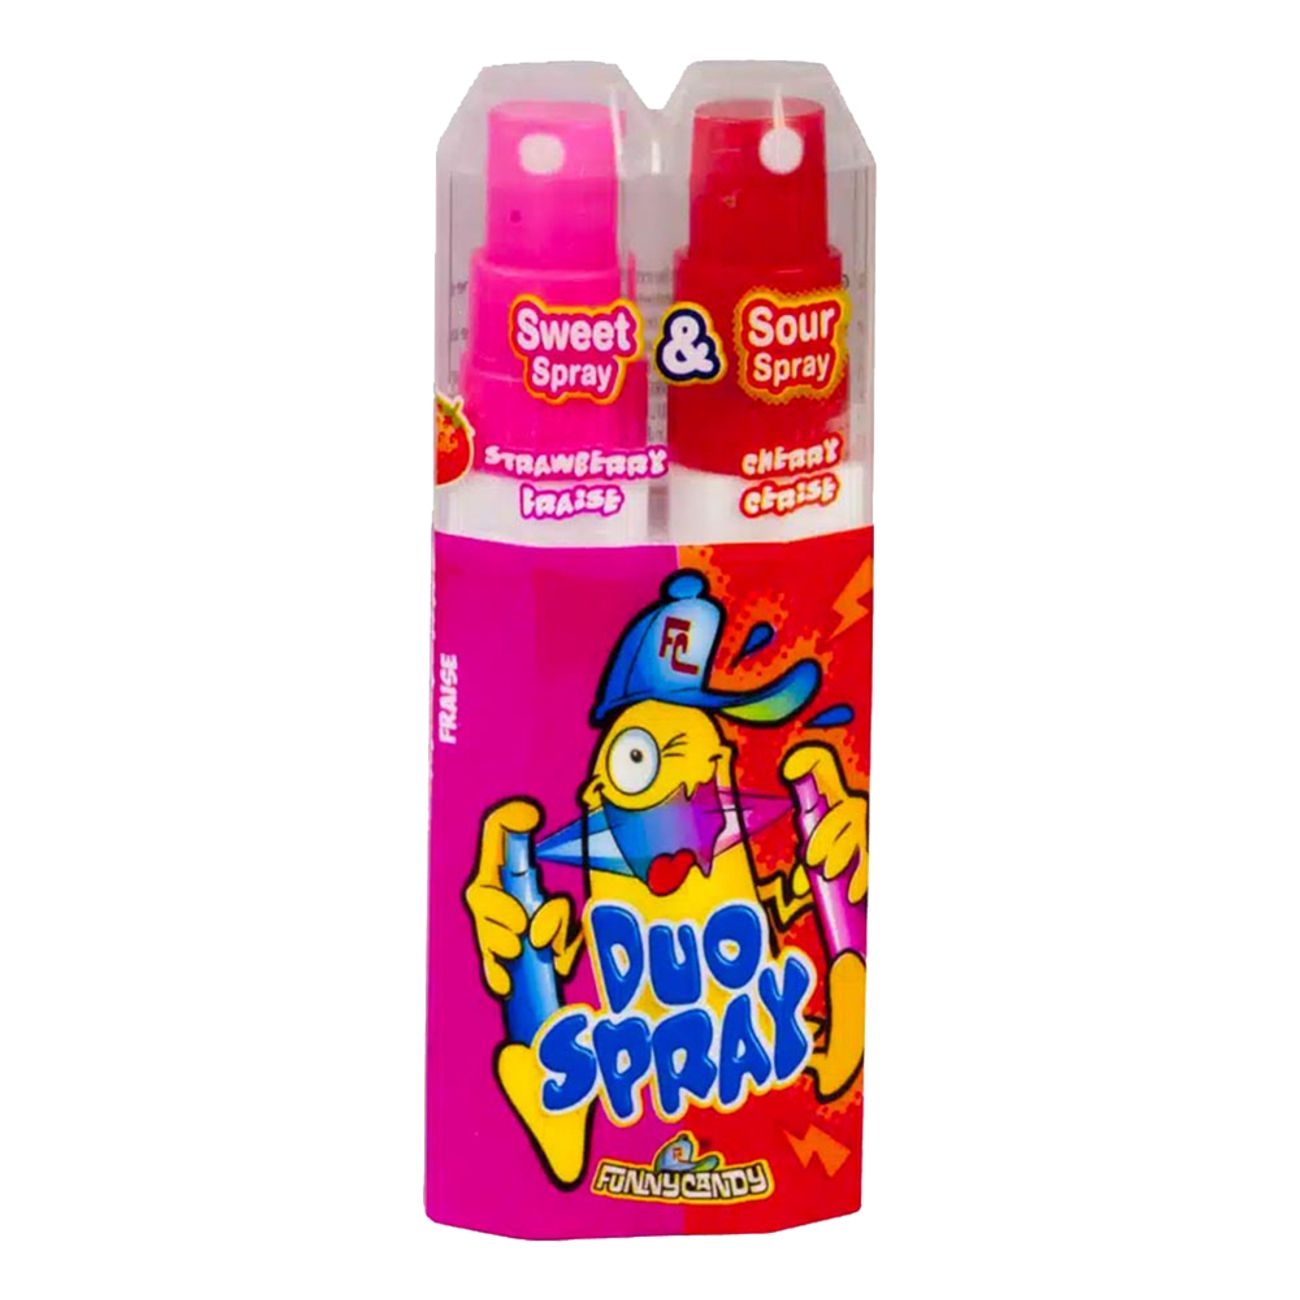 duo-spray-candy-96085-2